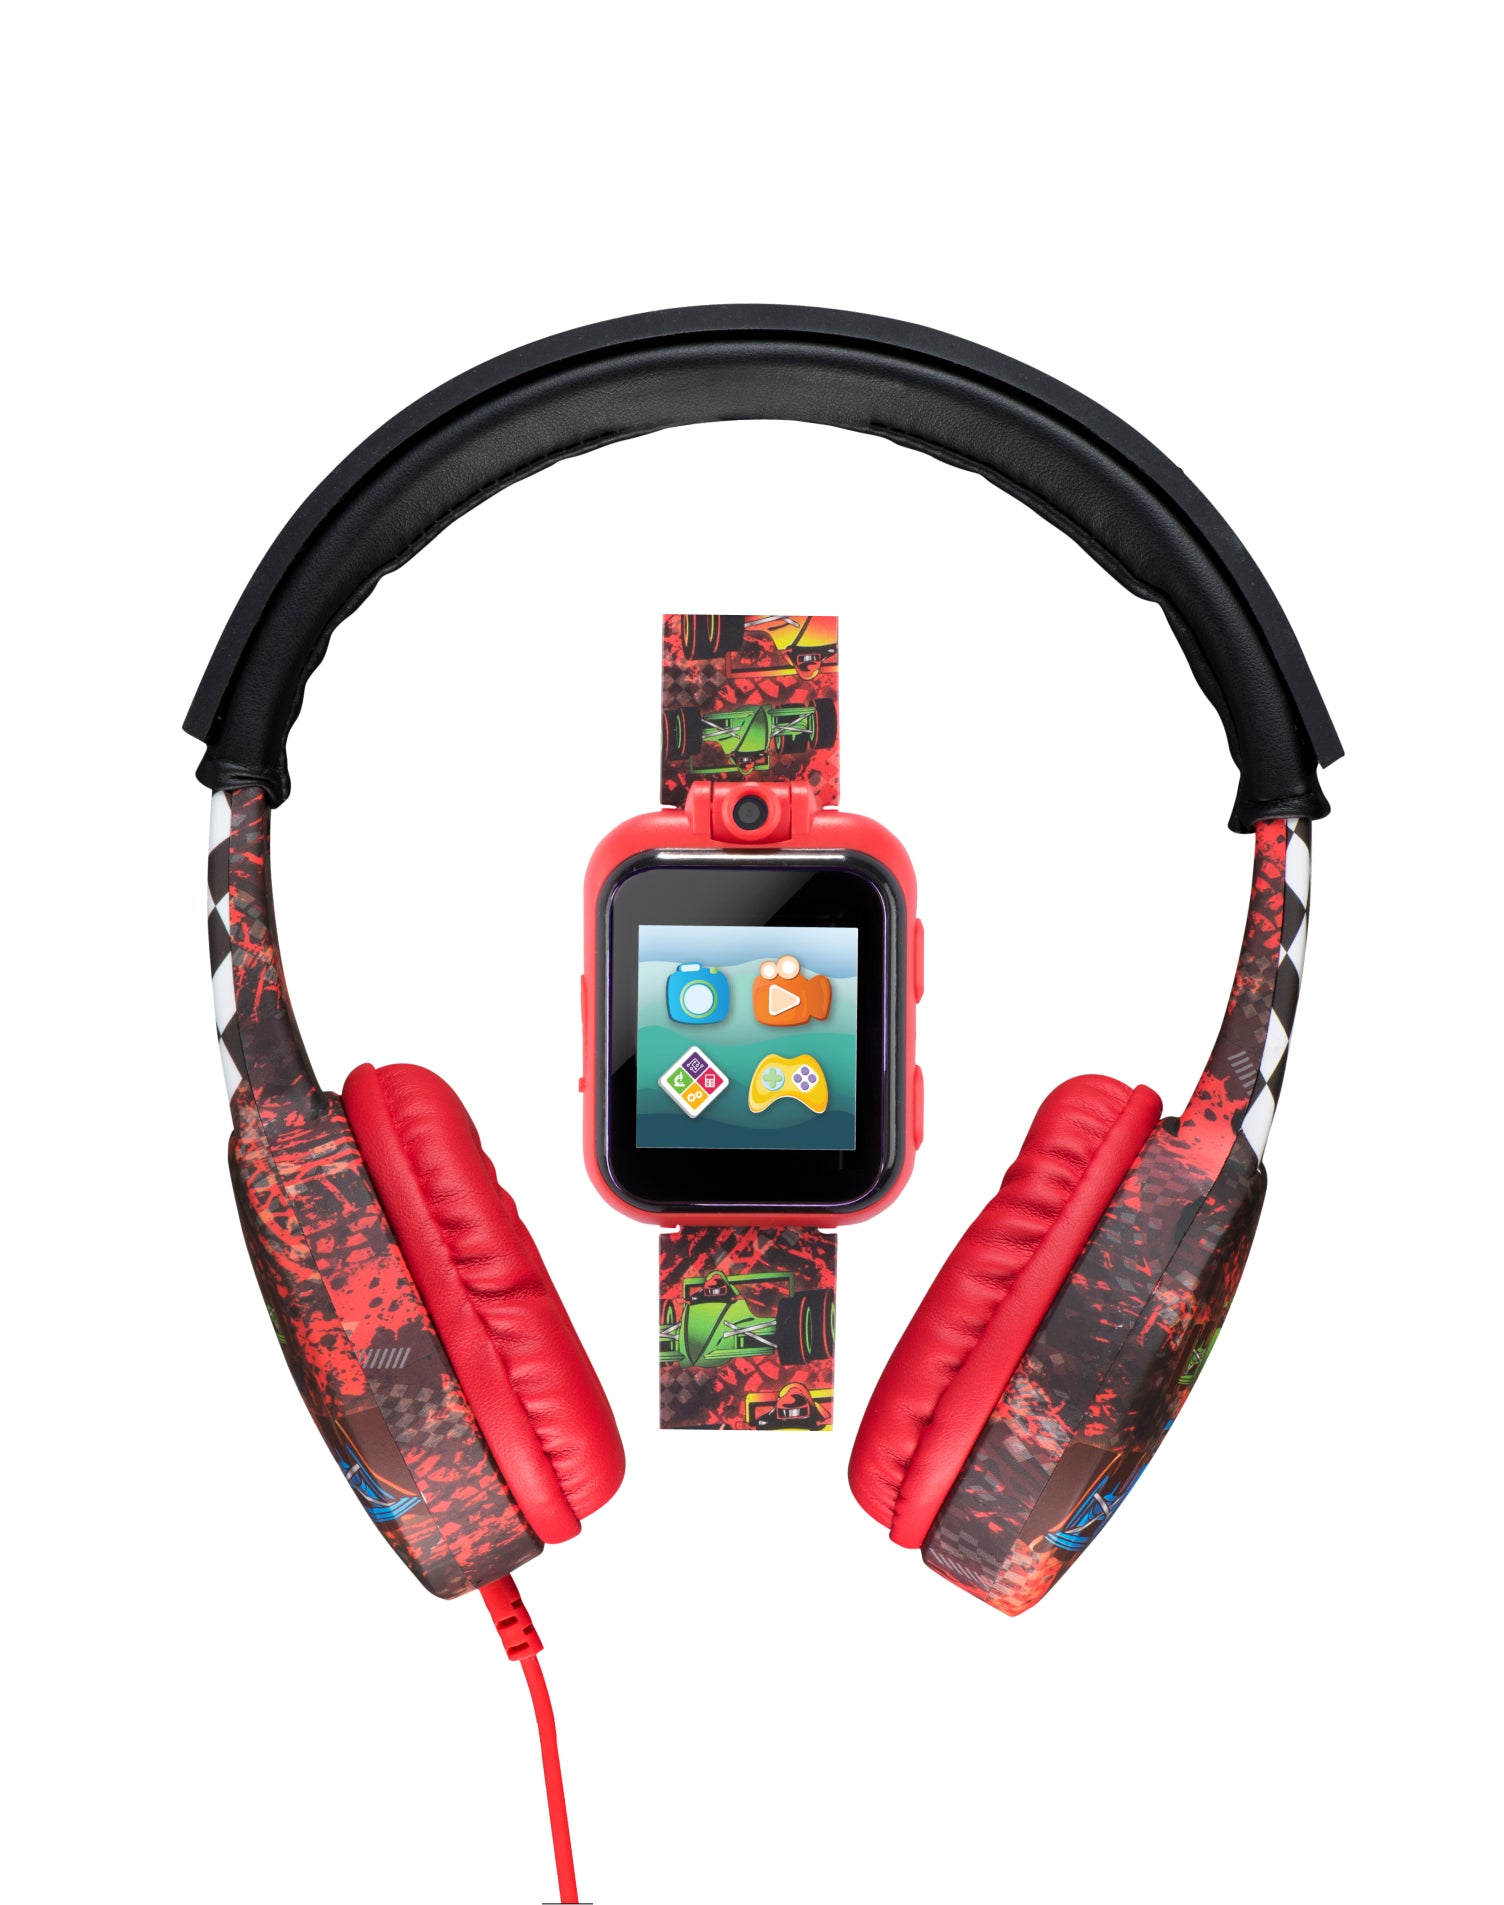 PlayZoom 2 Kids Smartwatch with Headphones: Red Race Cars affordable smart watch with headphones